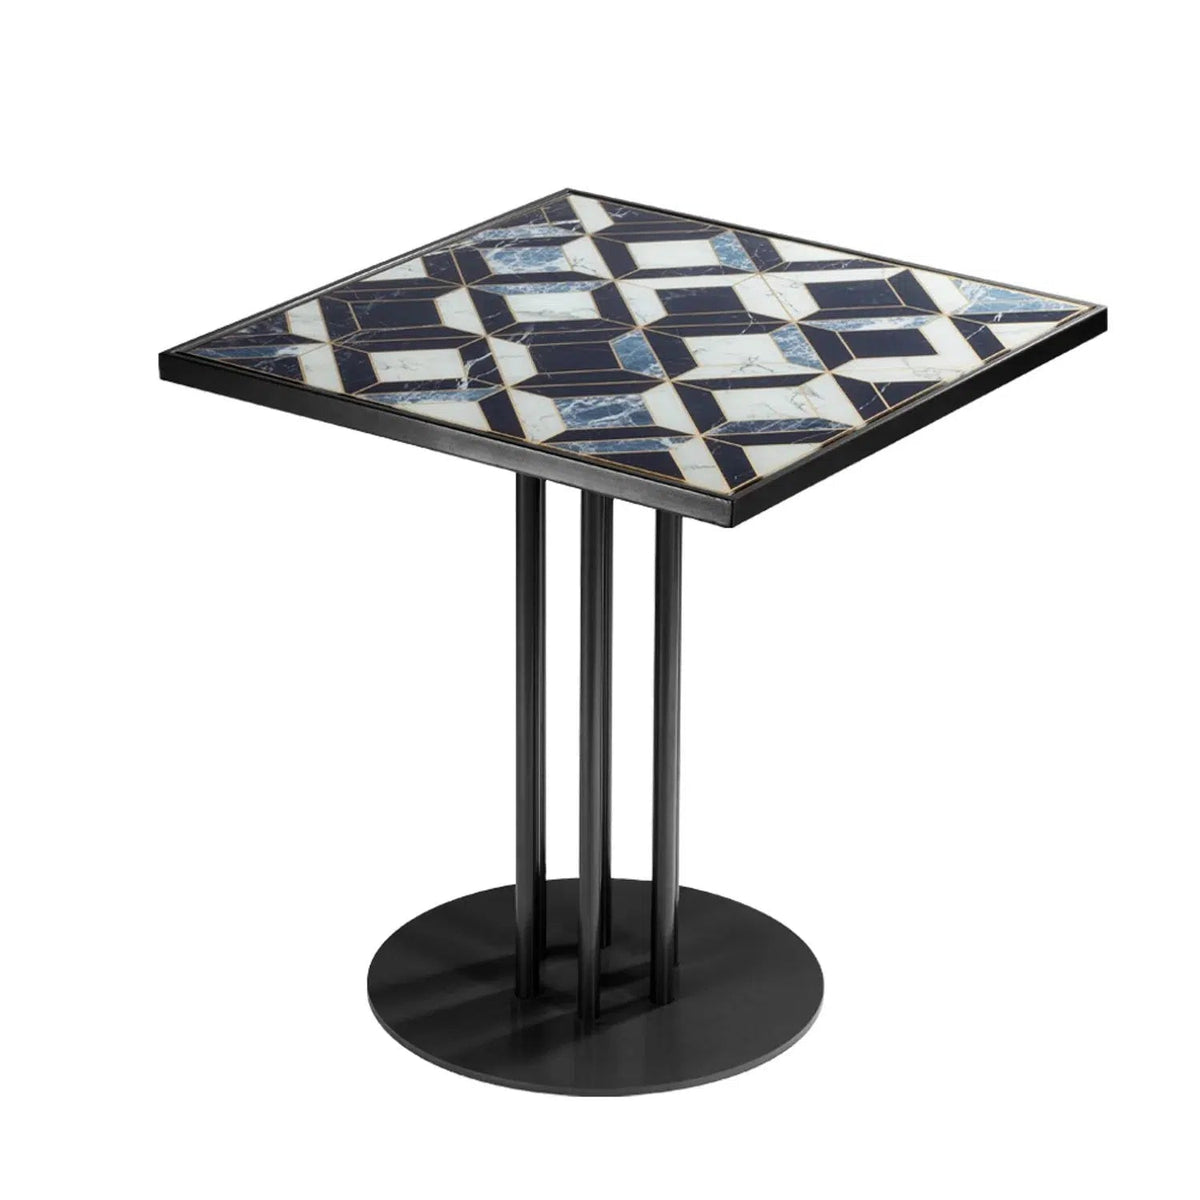 Praga Roma Printed Glass Dining Table-Mambo-Contract Furniture Store